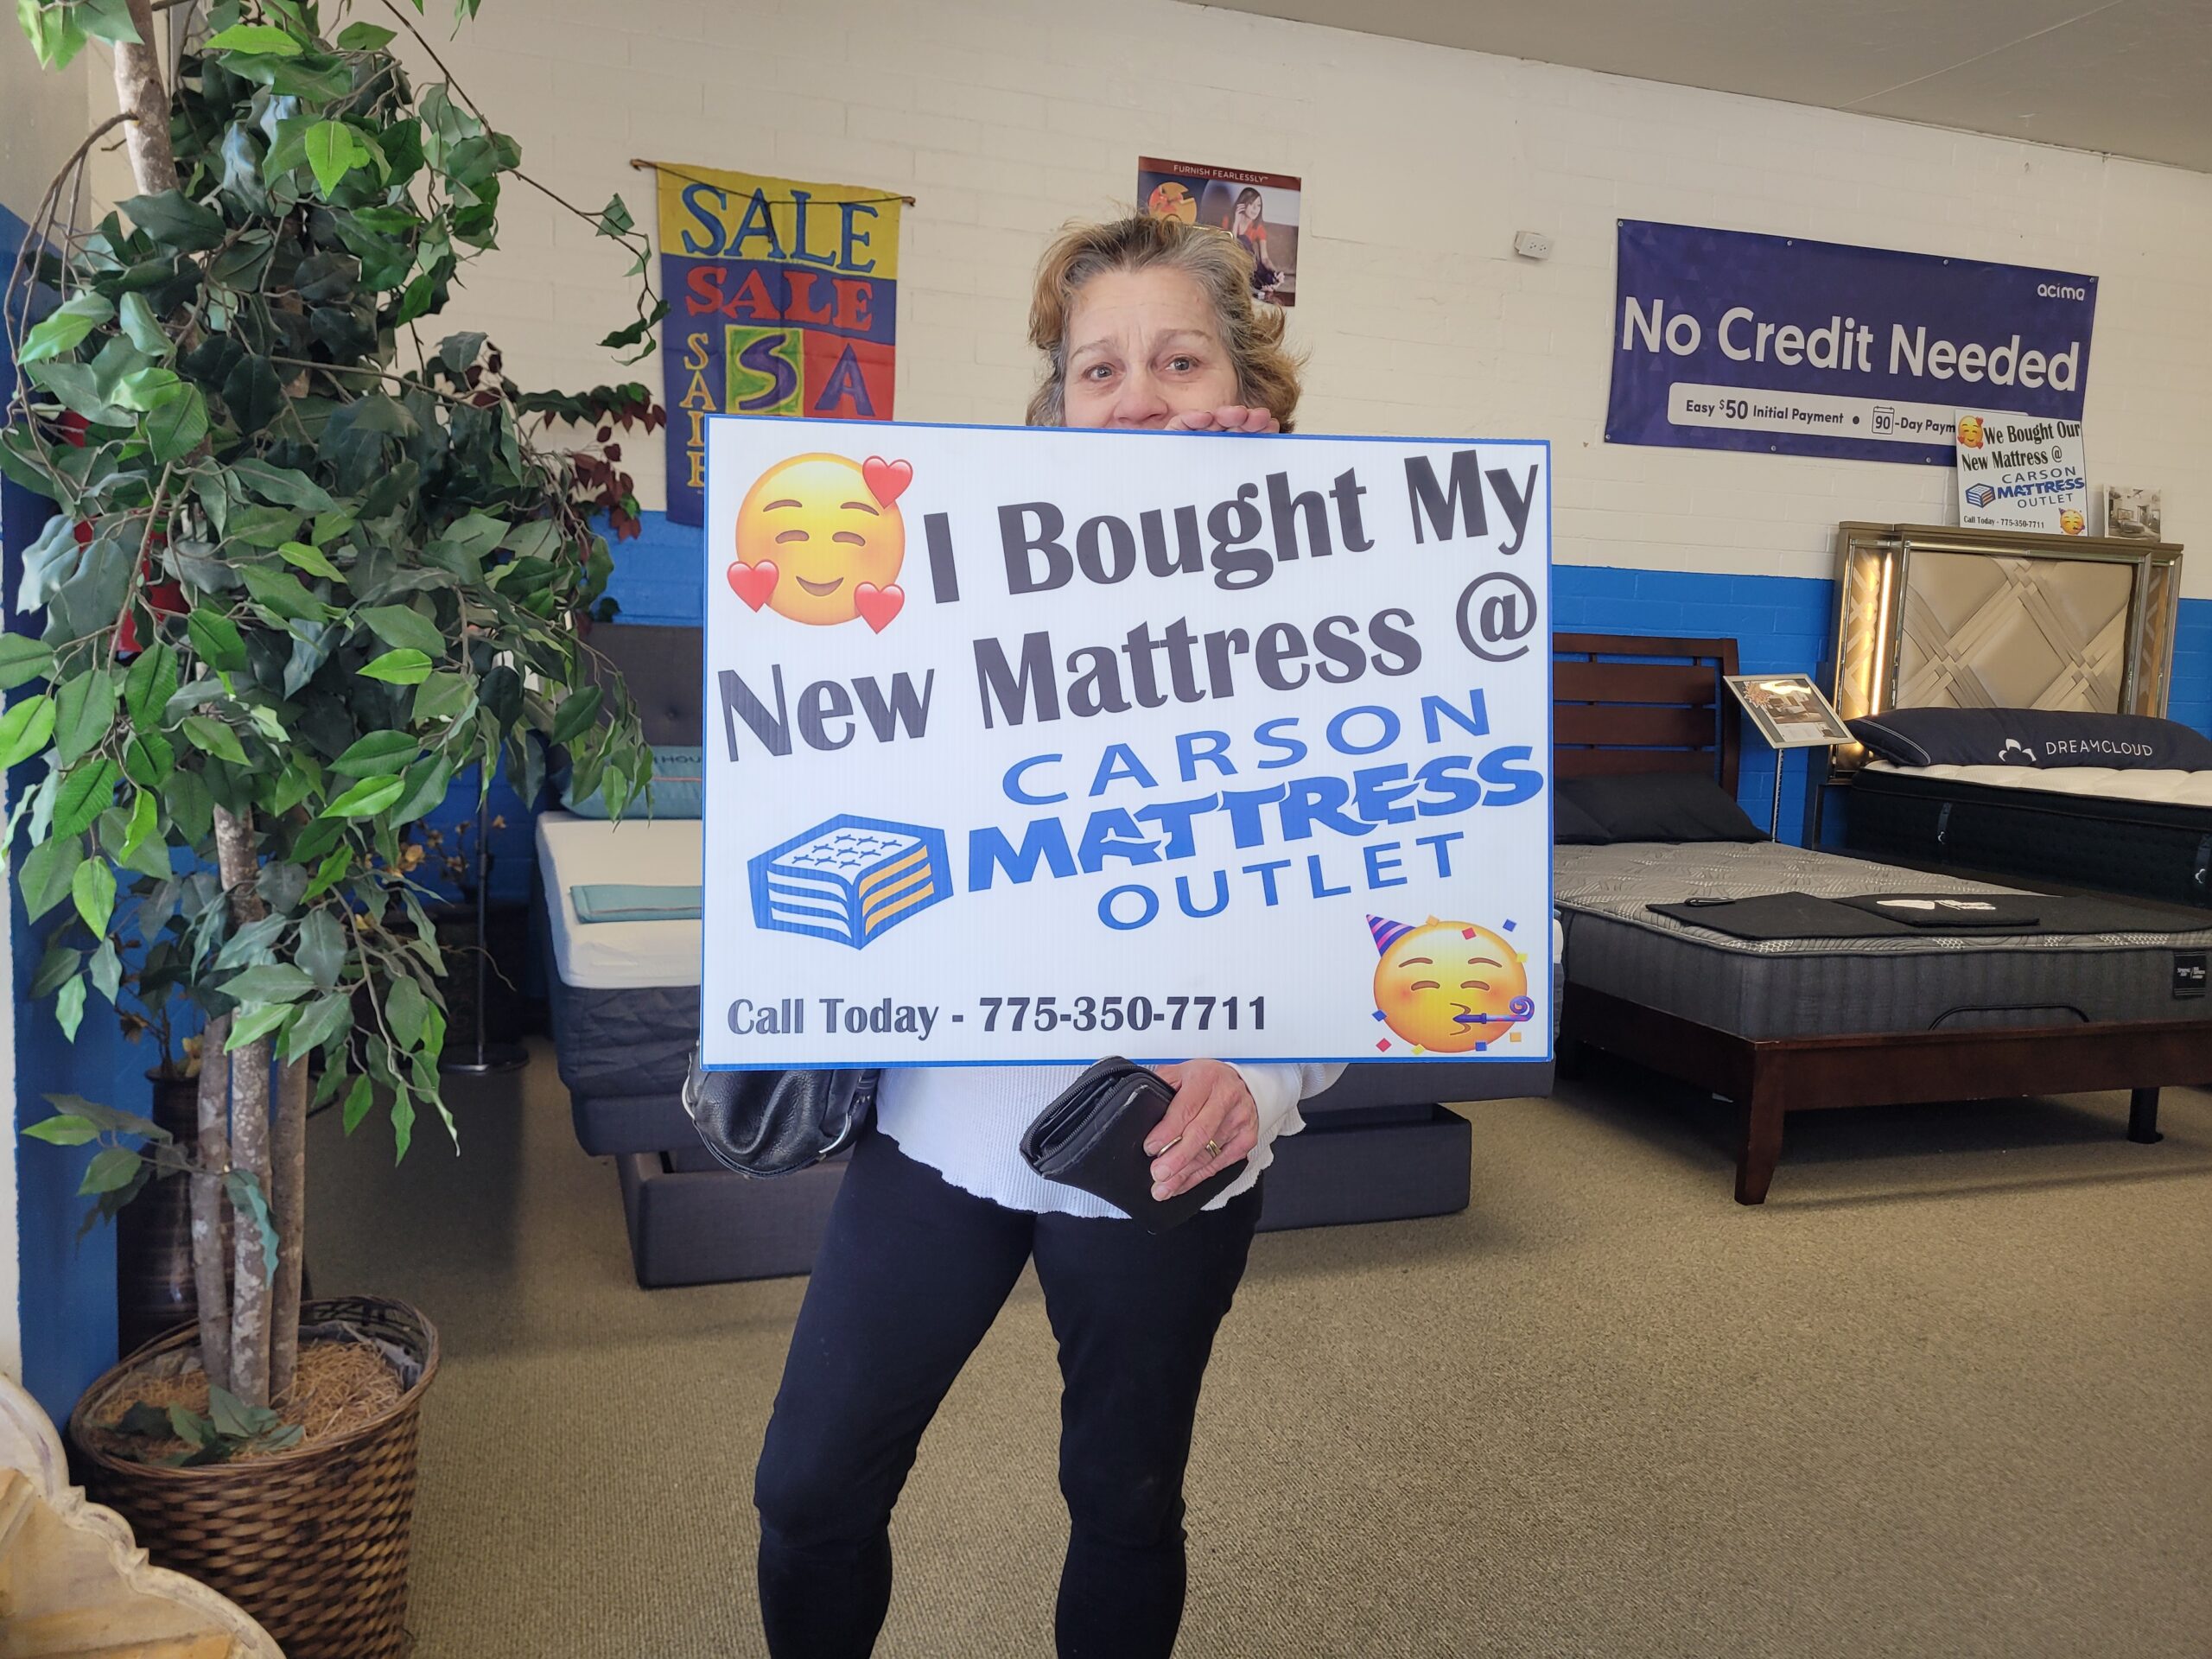 Happy customer of Carson Mattress Outlet, Mattress store in carson city and mattress store in reno, mattress sales everyday